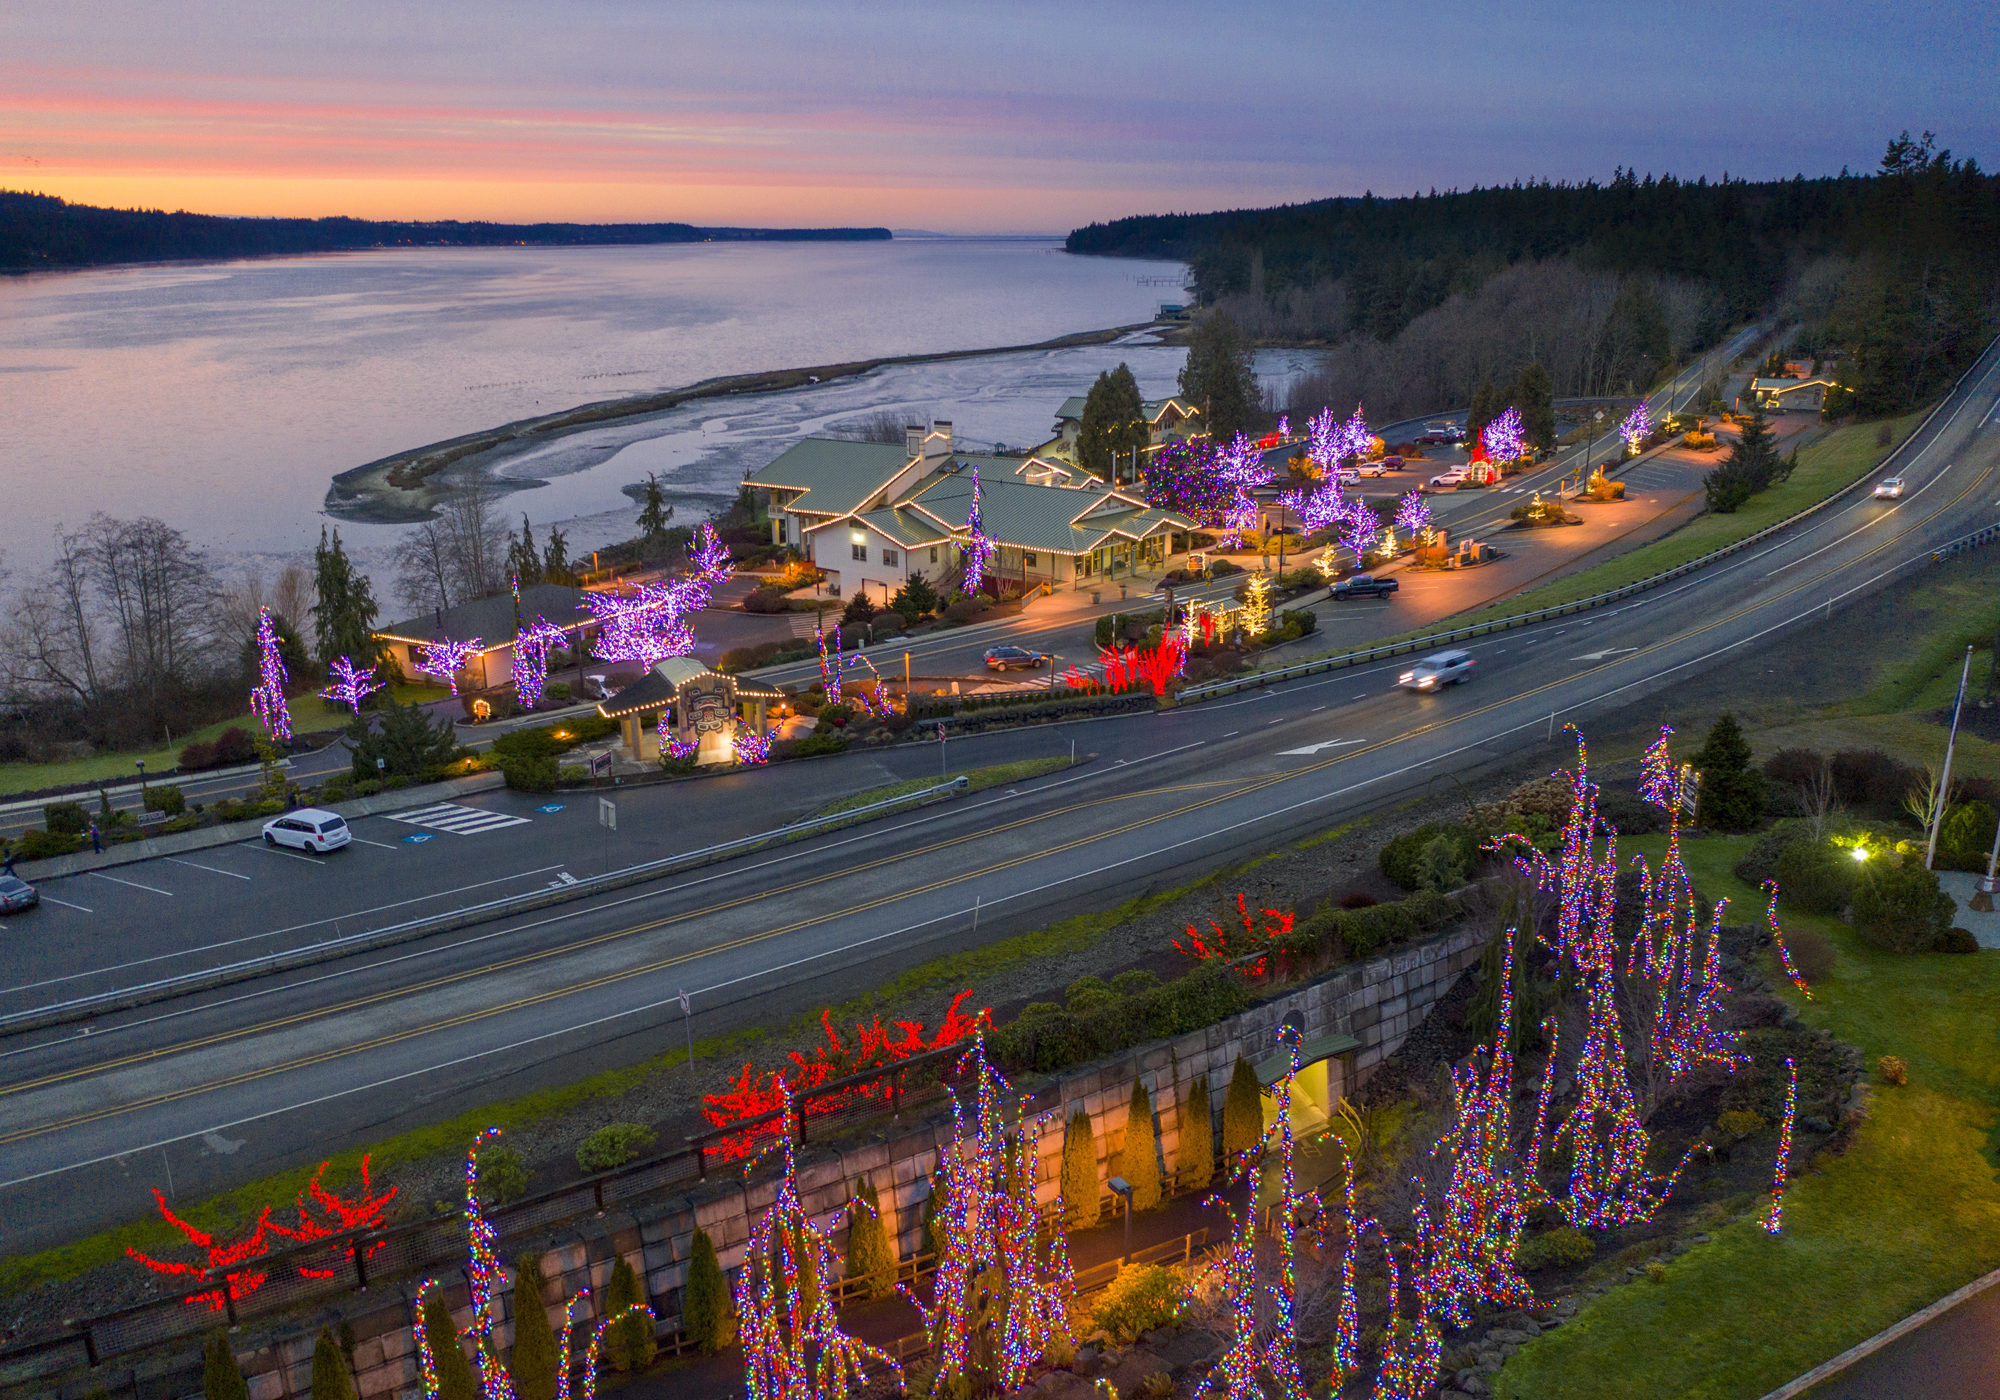 The lights of Blyn, WA with Sequim Bay in background